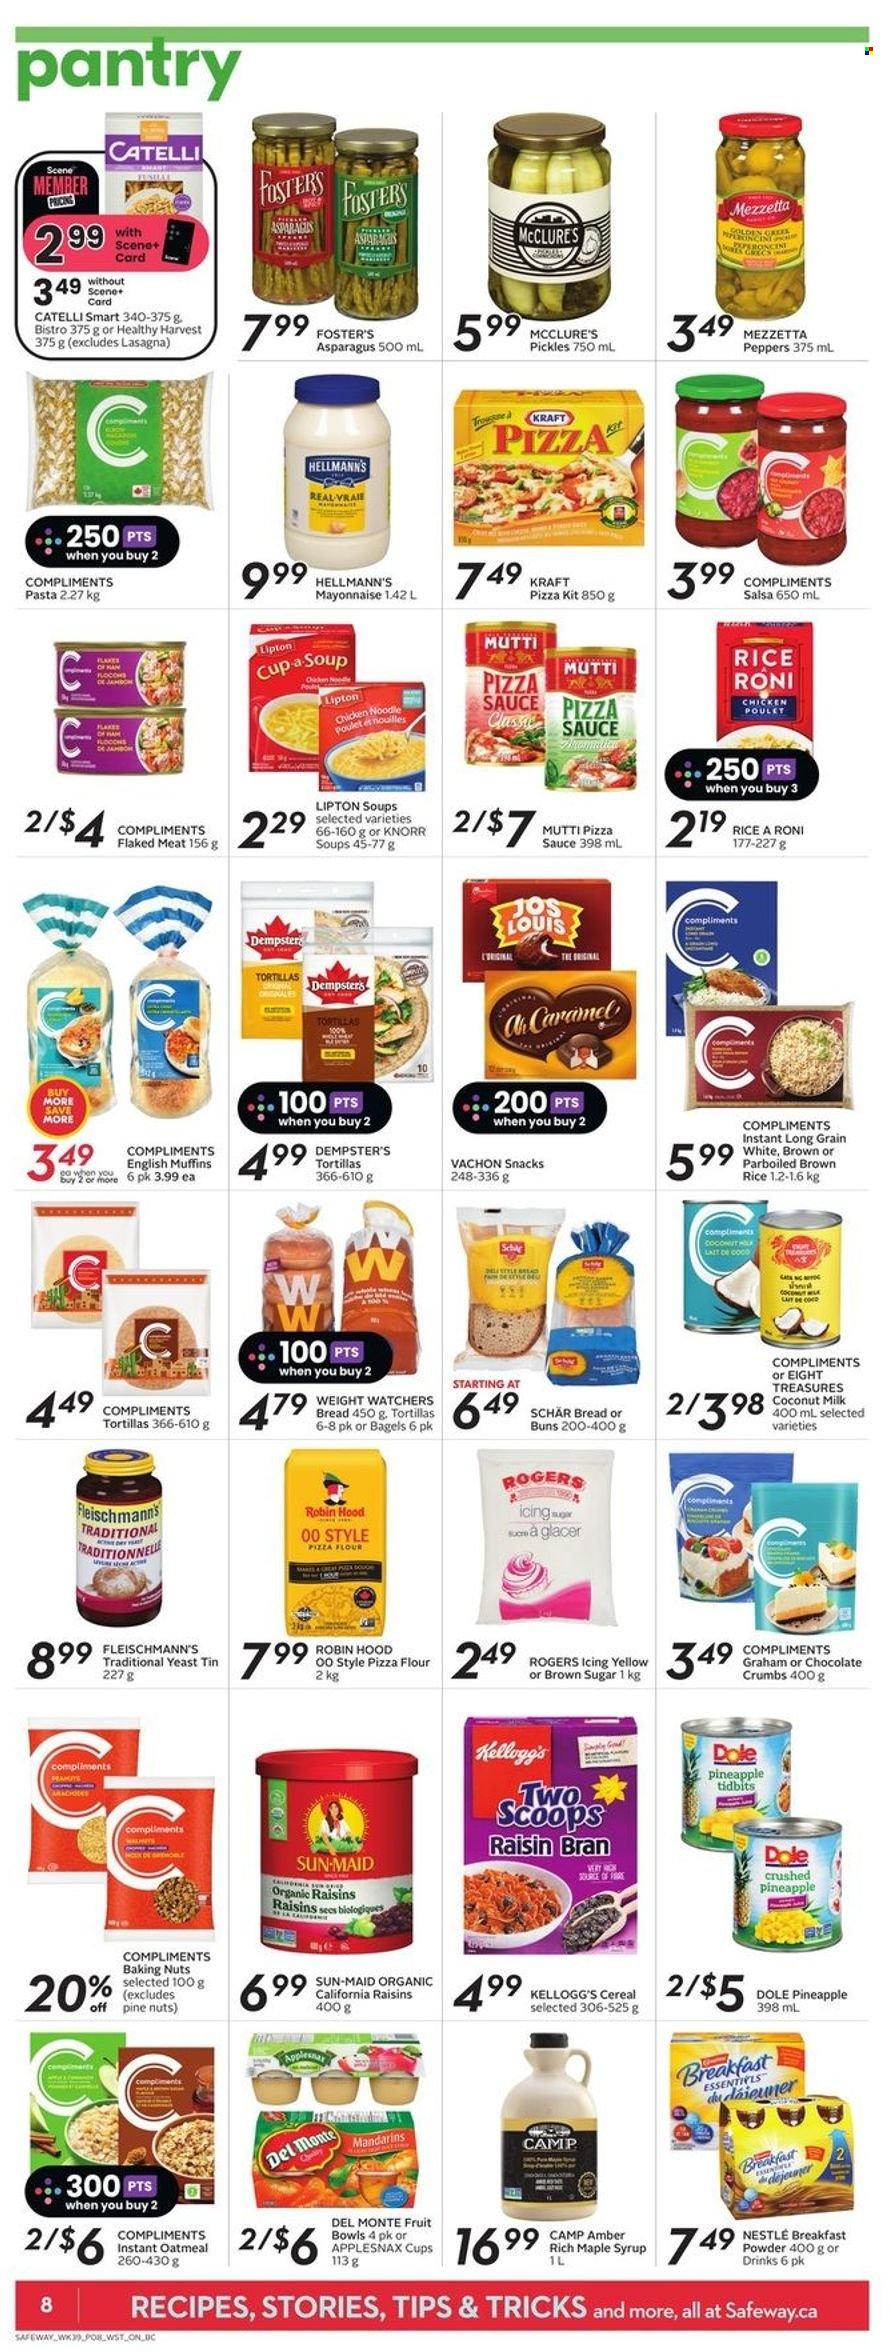 thumbnail - Safeway Flyer - January 26, 2023 - February 01, 2023 - Sales products - bagels, bread, english muffins, tortillas, buns, asparagus, Dole, peppers, apples, mandarines, pineapple, cod, soup, pasta, sauce, noodles, Kraft®, ham, yeast, mayonnaise, Hellmann’s, chocolate, snack, Kellogg's, oatmeal, coconut milk, pickles, Del Monte, cereals, Raisin Bran, brown rice, rice, caramel, salsa, maple syrup, syrup, pine nuts, Nestlé, Lipton, Knorr. Page 9.